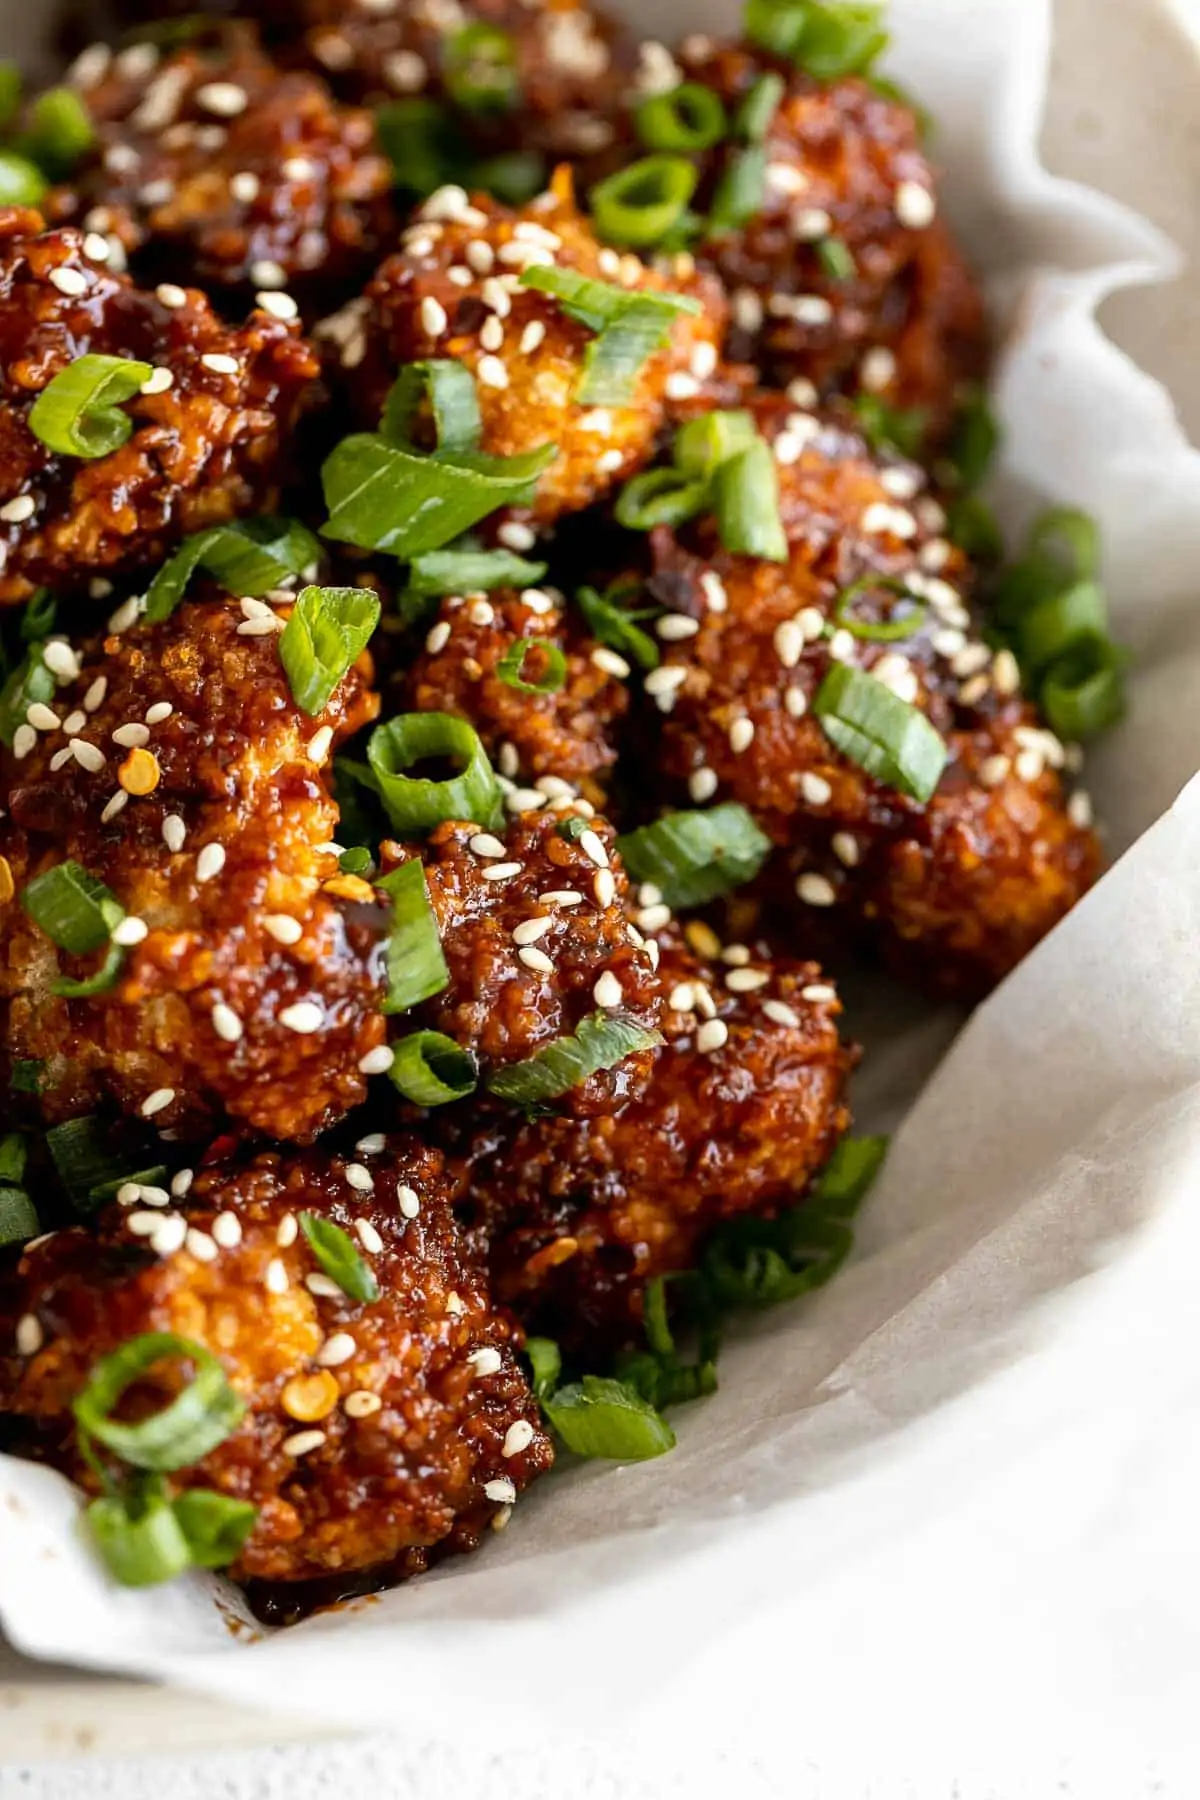 up close image of the cauliflower wings to show crispy texture